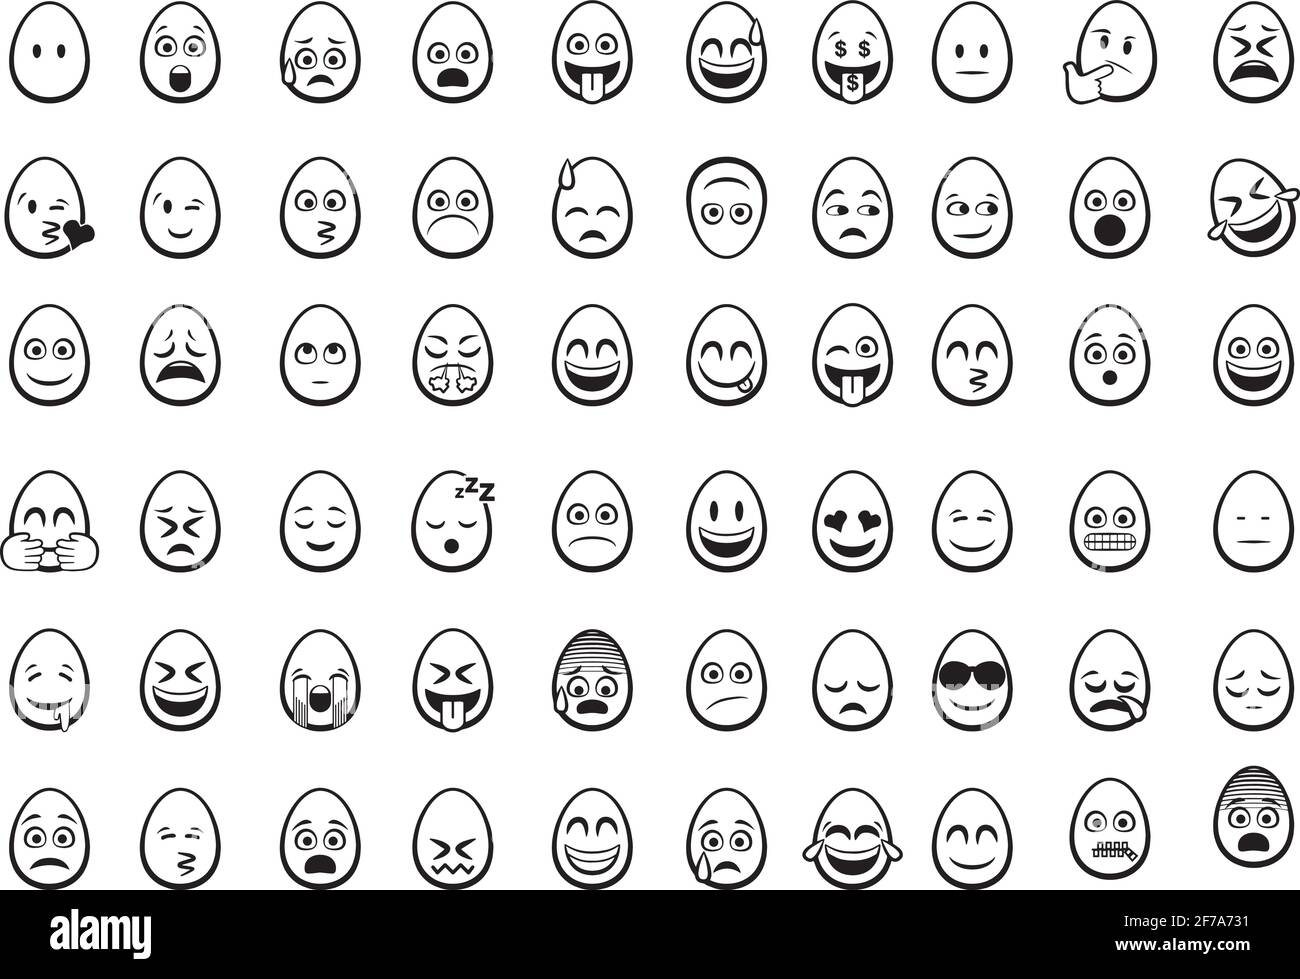 Egg head emoji icons set. A collection of egg head emoji icons collection for iOS, Android and web projects. Stock Vector